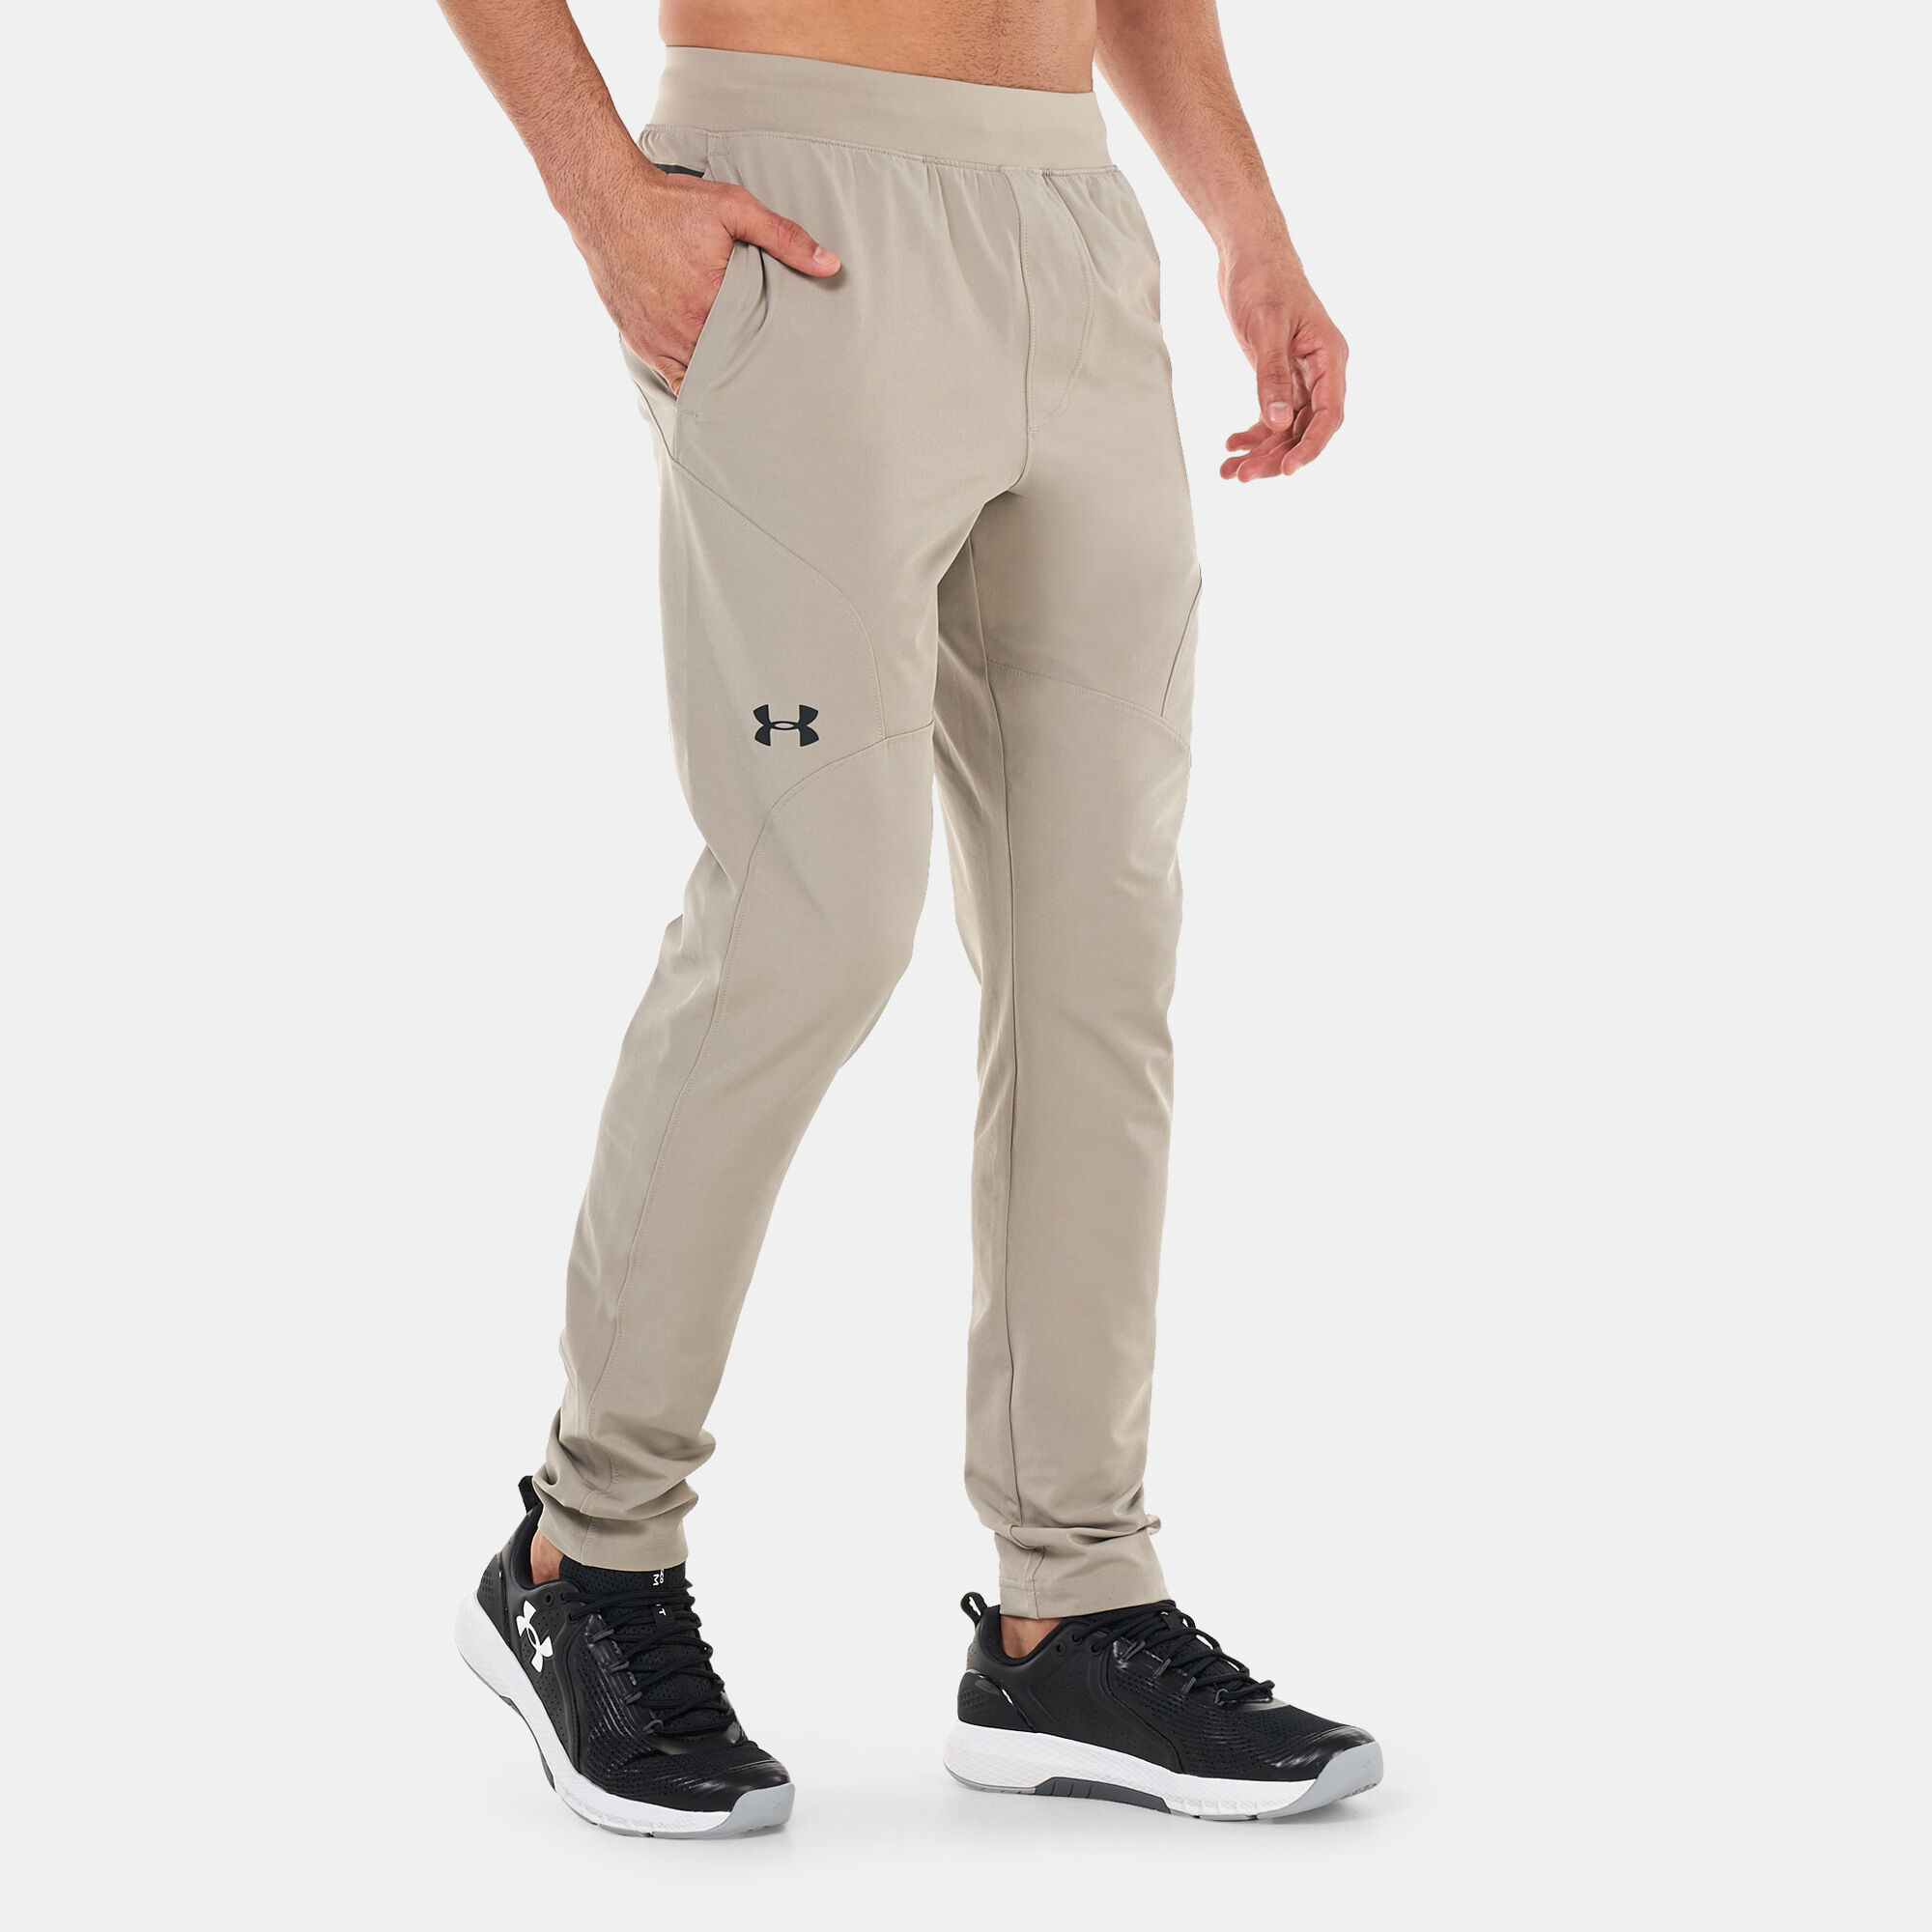 Under Armour Mens Showdown Tapered Pants  GRAY  Golf Anything Canada